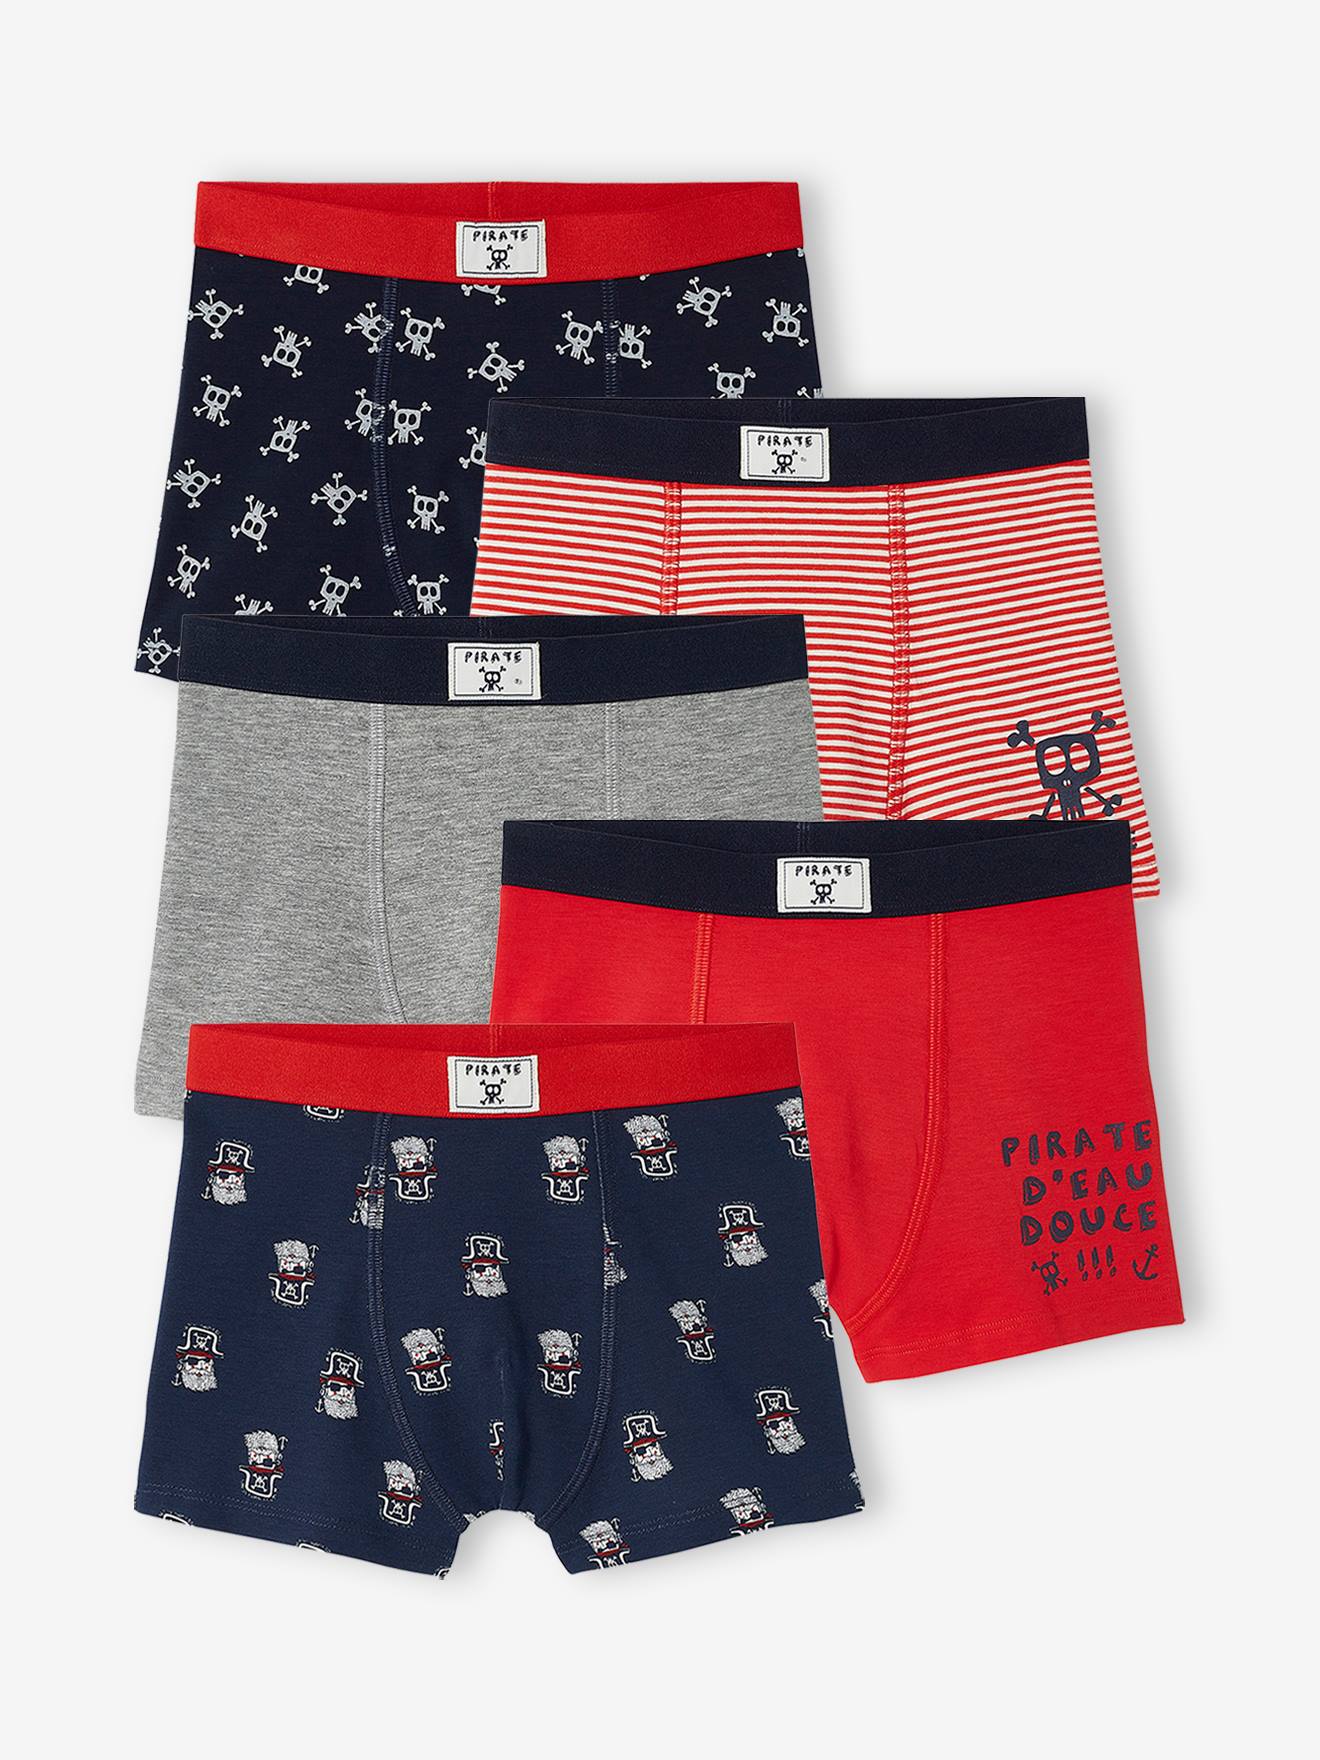 Pack of 5 Pairs of Stretch "Pirates" Boxer Shorts for Boys blue dark all over printed